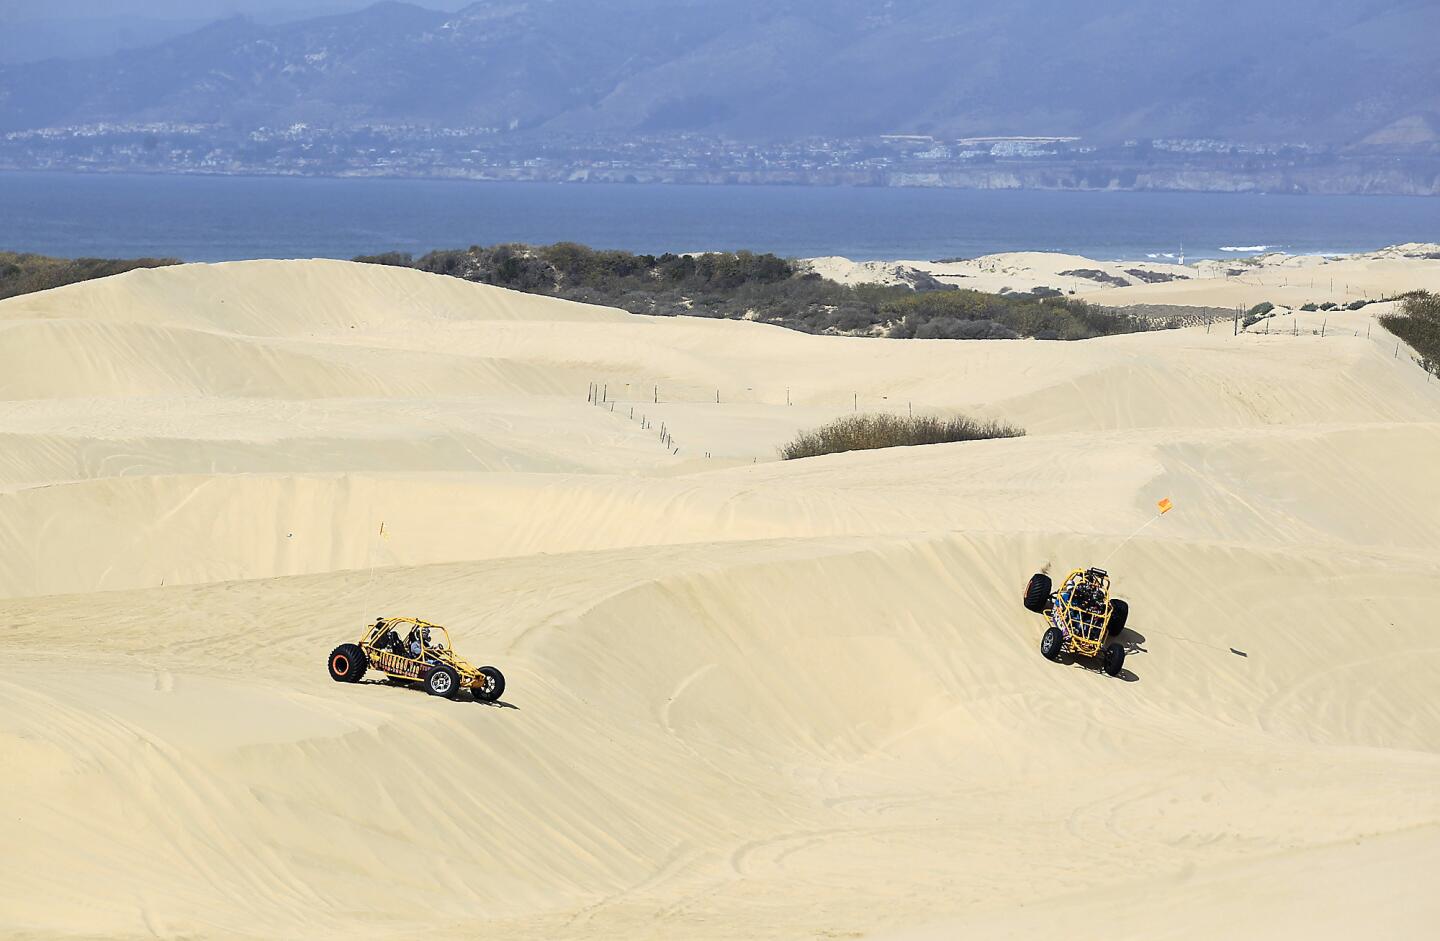 Off-roaders do their thing at Oceano Dunes. Many residents believe such activity makes particulate pollution worse in adjacent areas.